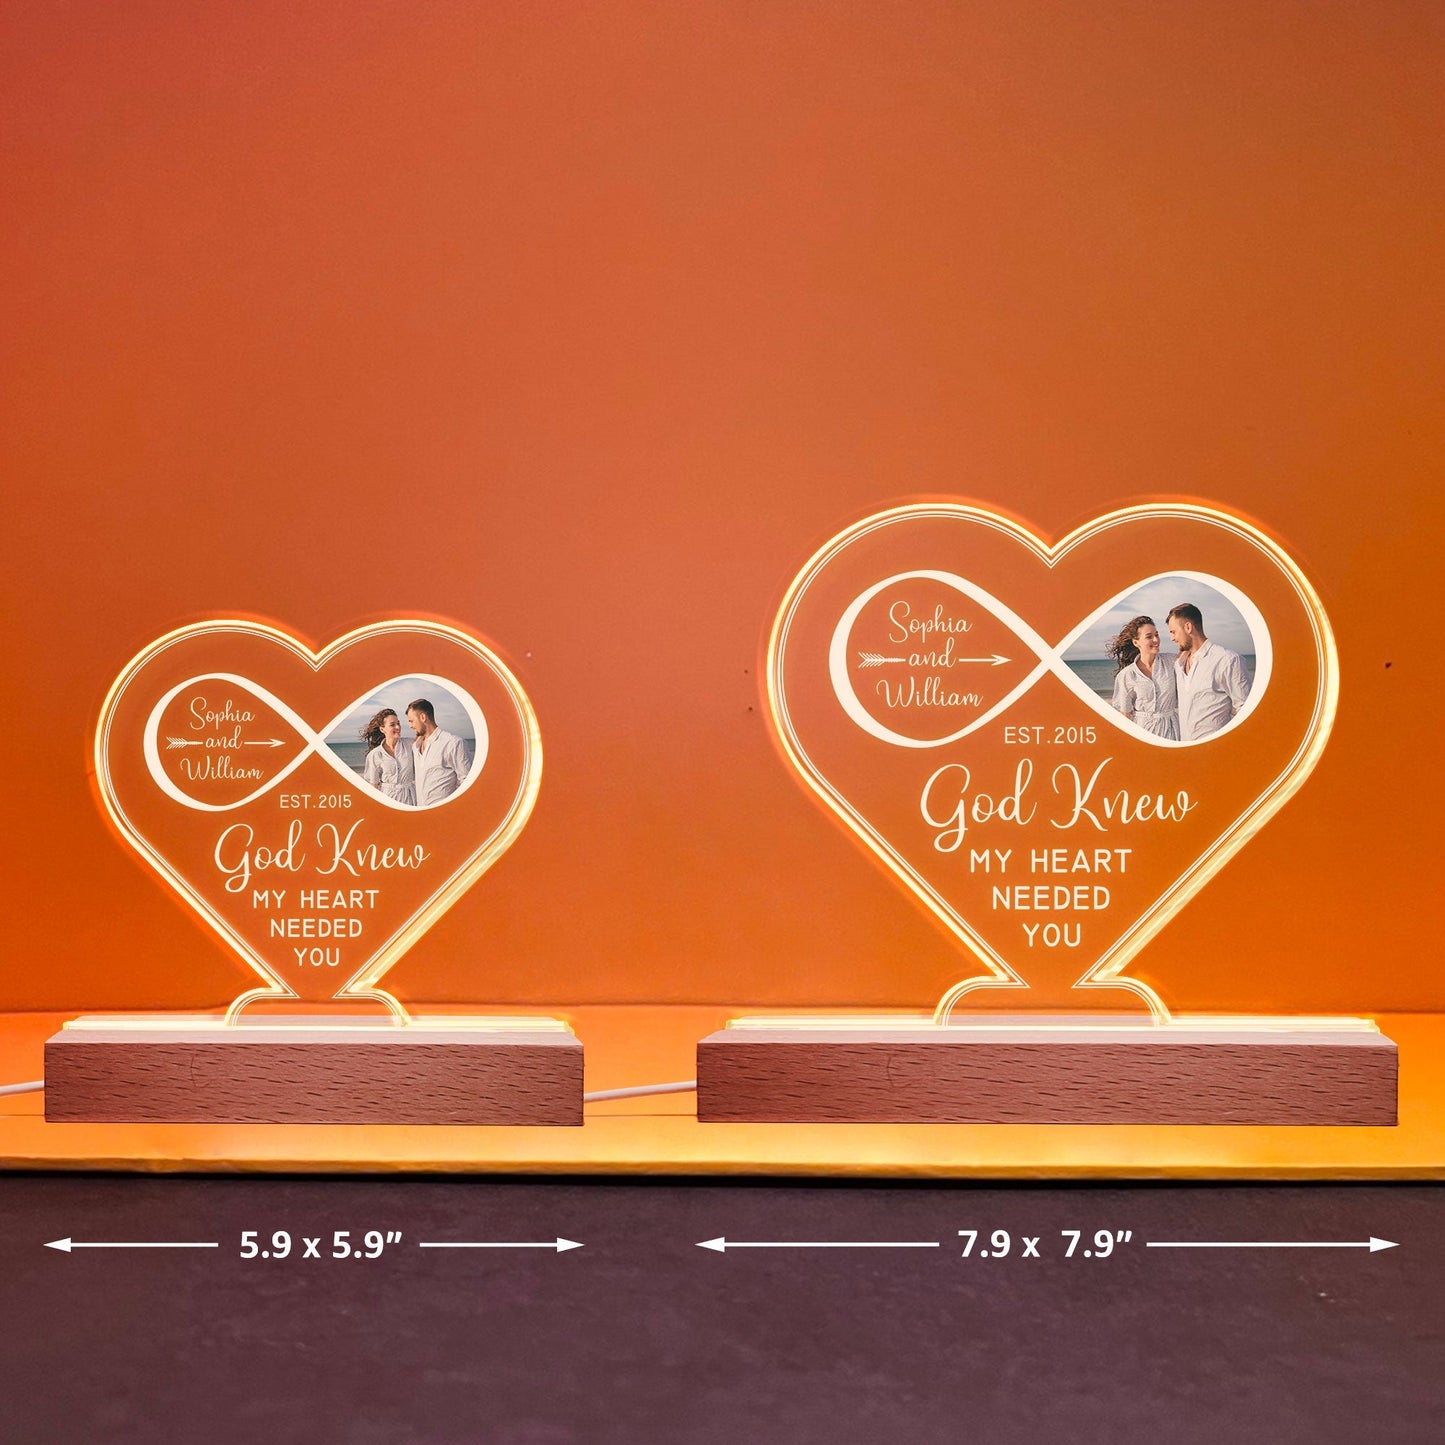 3D LED Light - Wooden base can be customised with a picture for a loved one